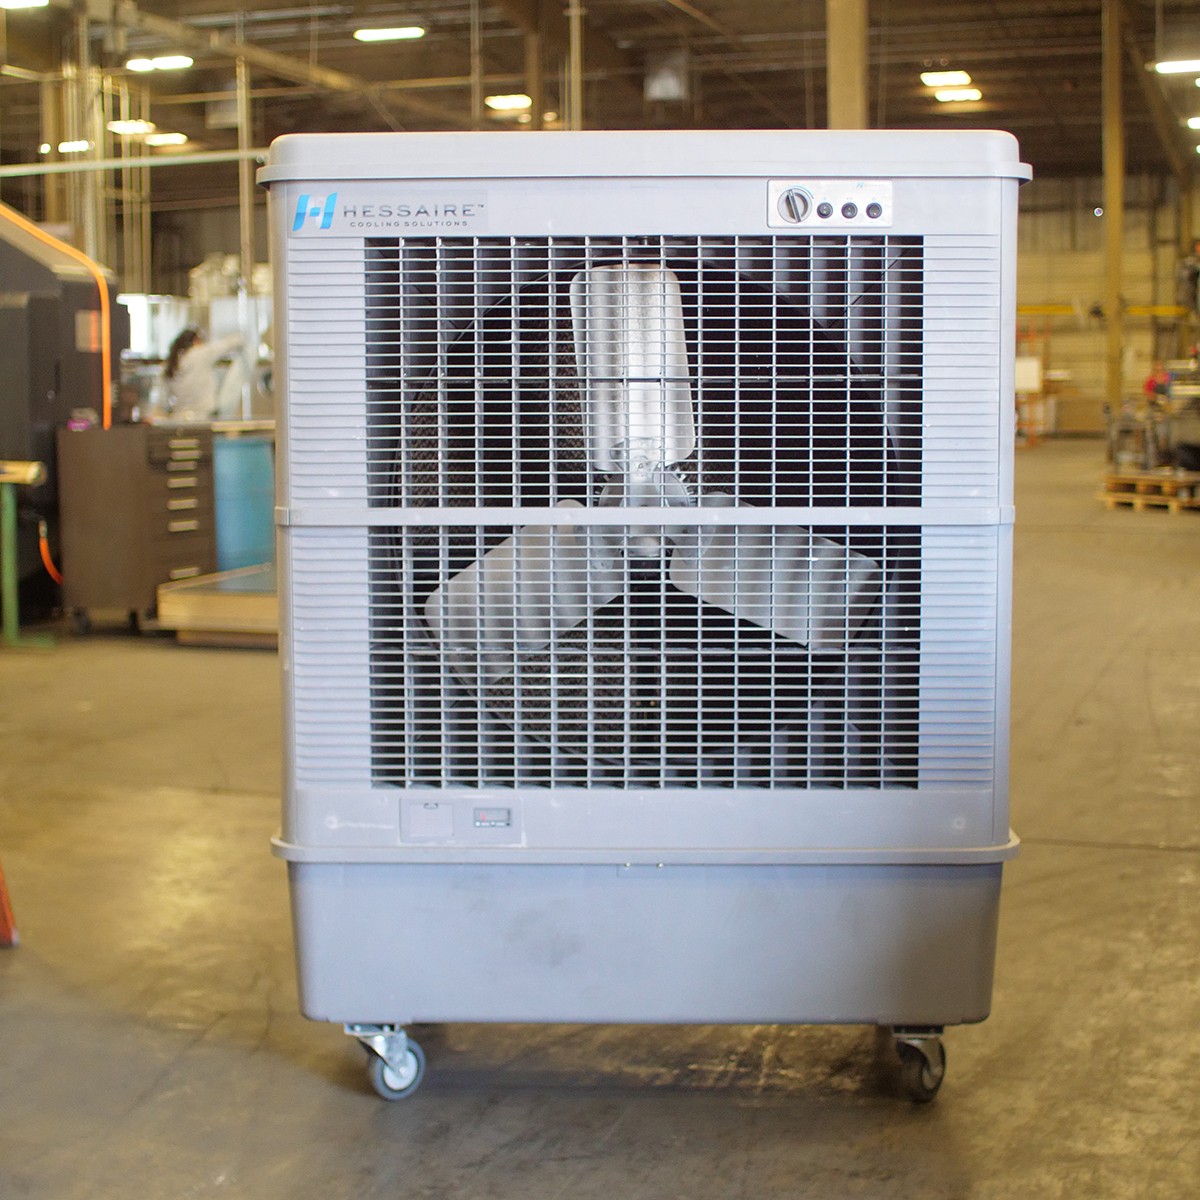 hessaire cooling solutions mc92